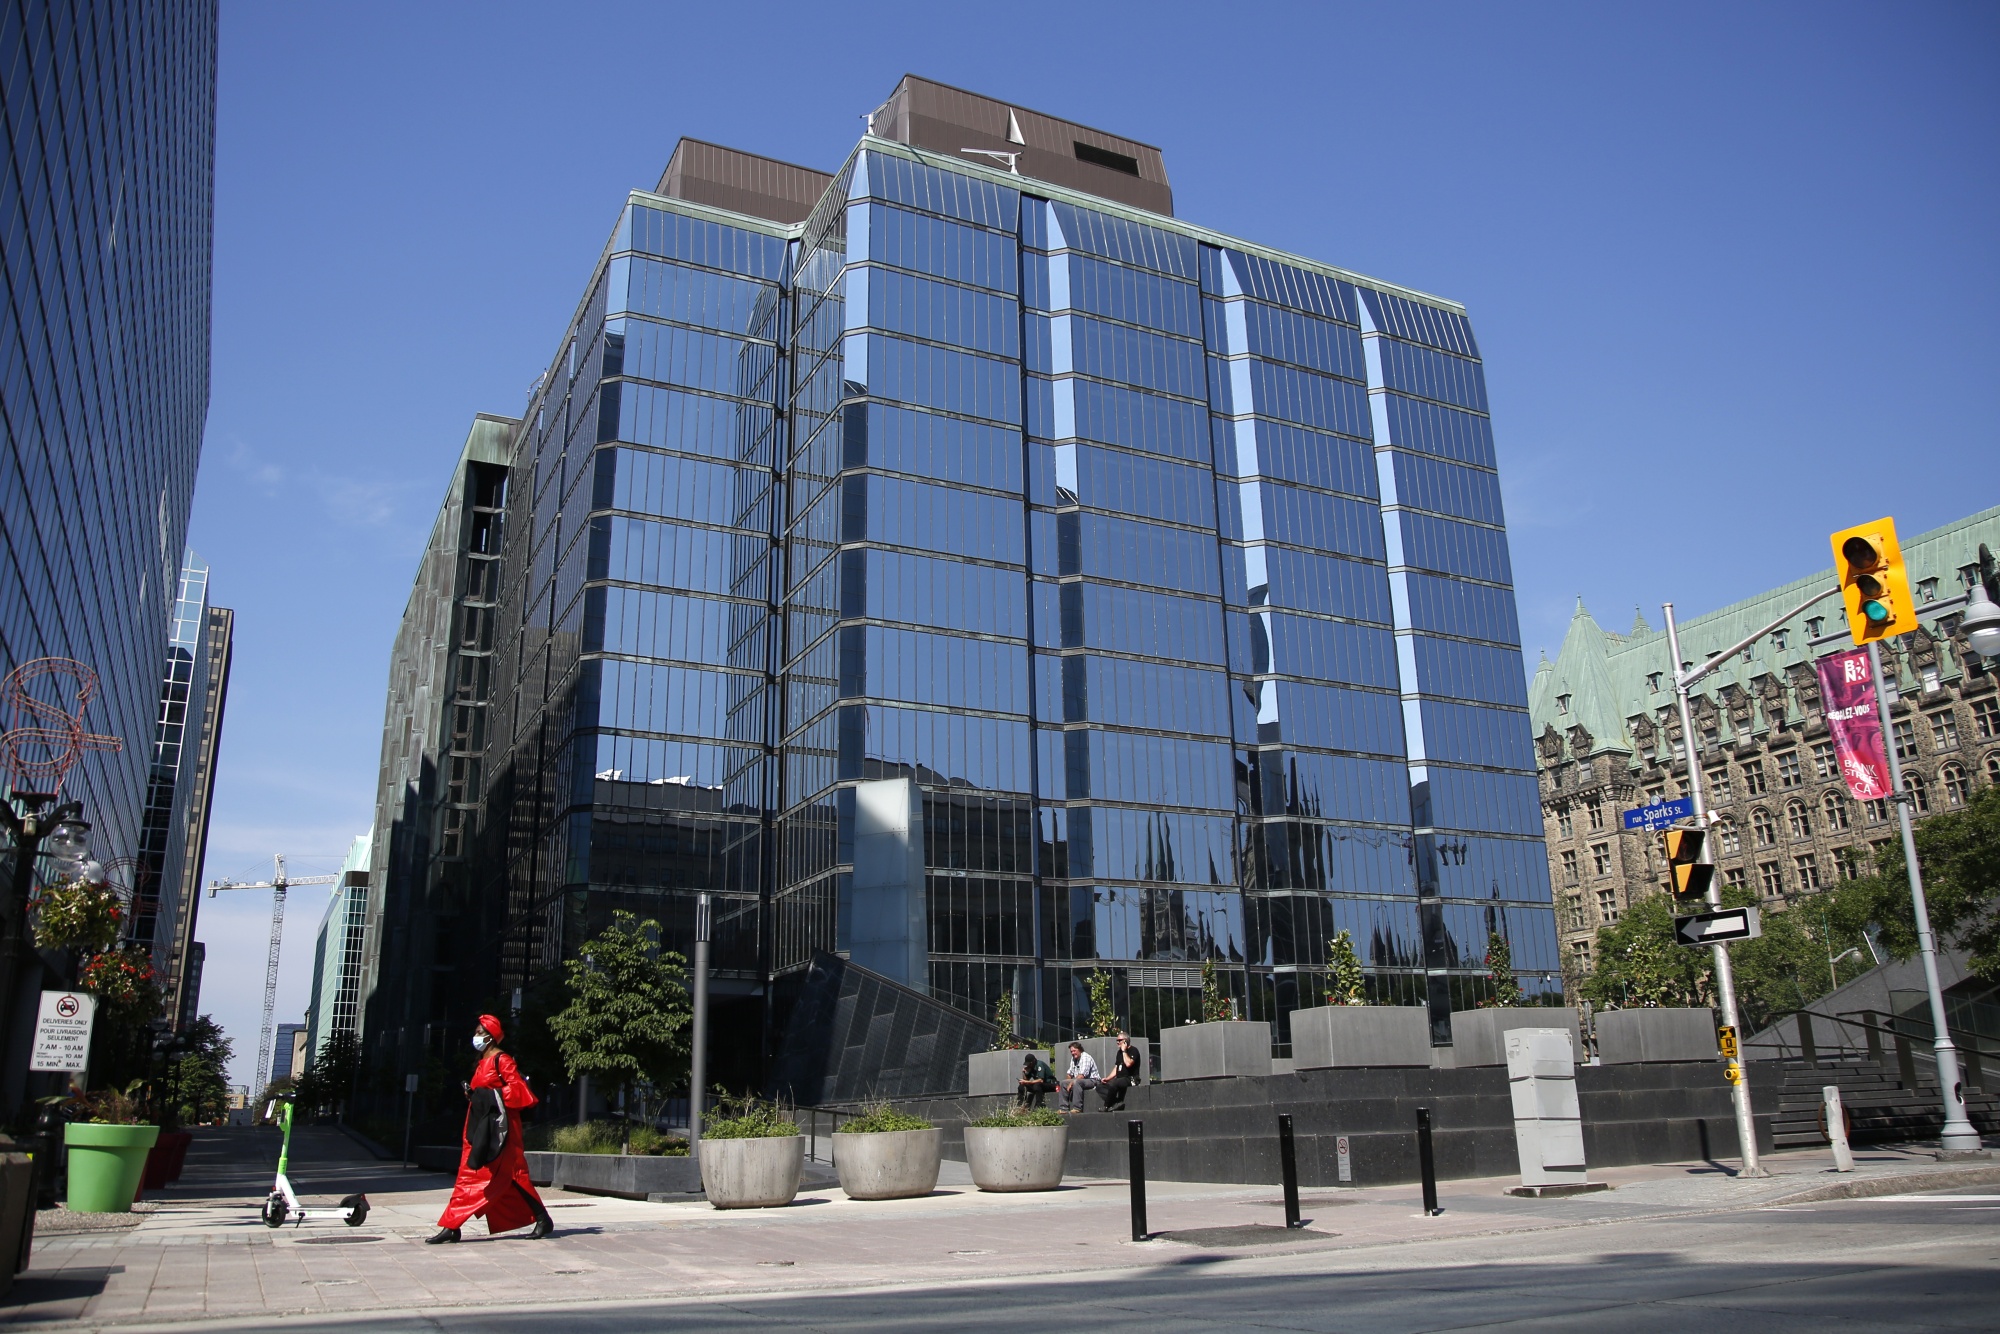 The Bank of Canada building in Ottawa, where more employees will be allowed access over the fall as Covid-19 restrictions ease.